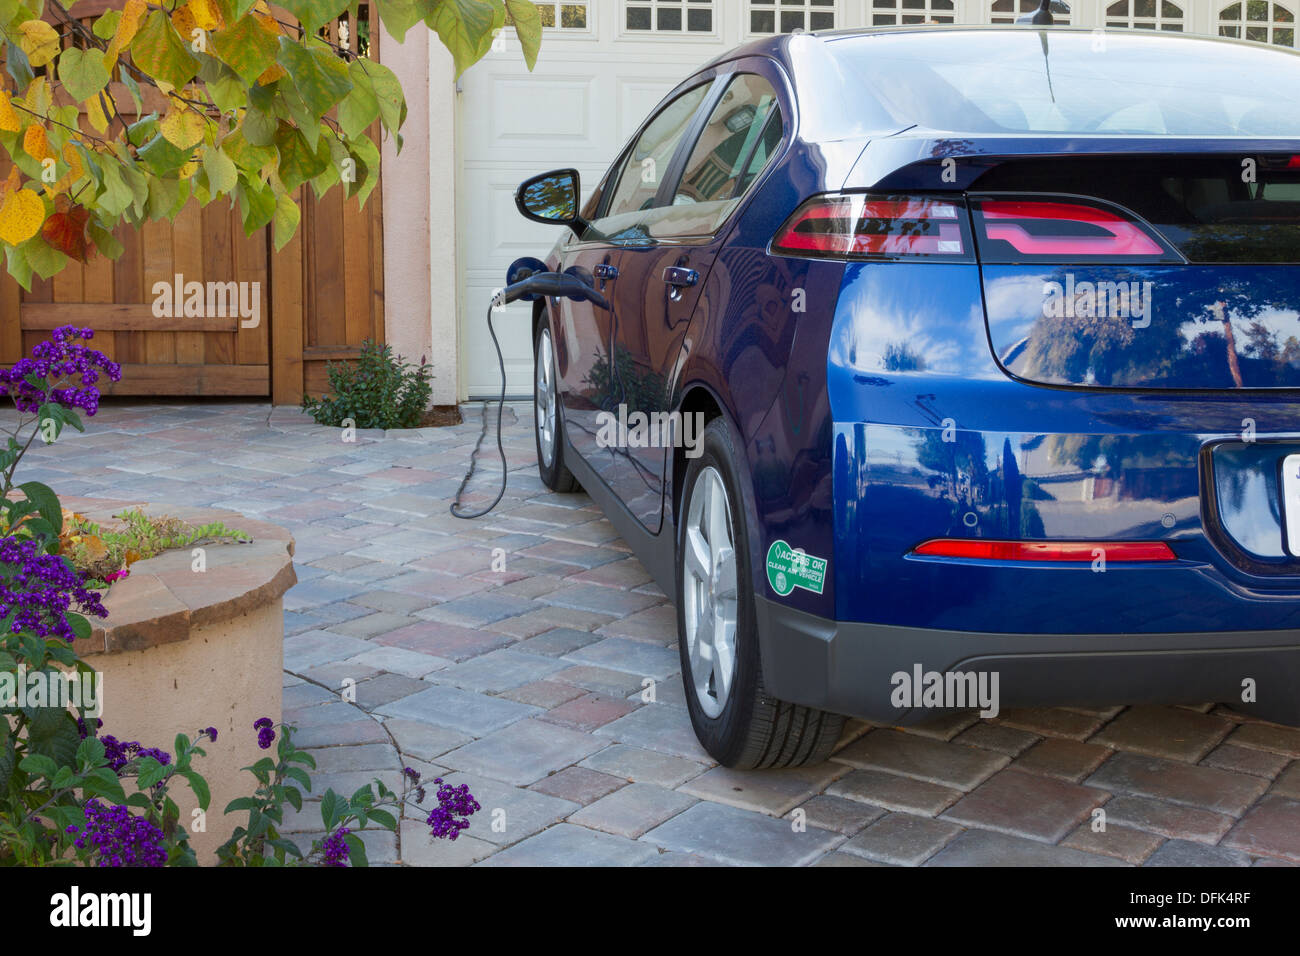 Plug-in electric car with carpool sticker parked in driveway, with connector plugged in and charging at home Stock Photo